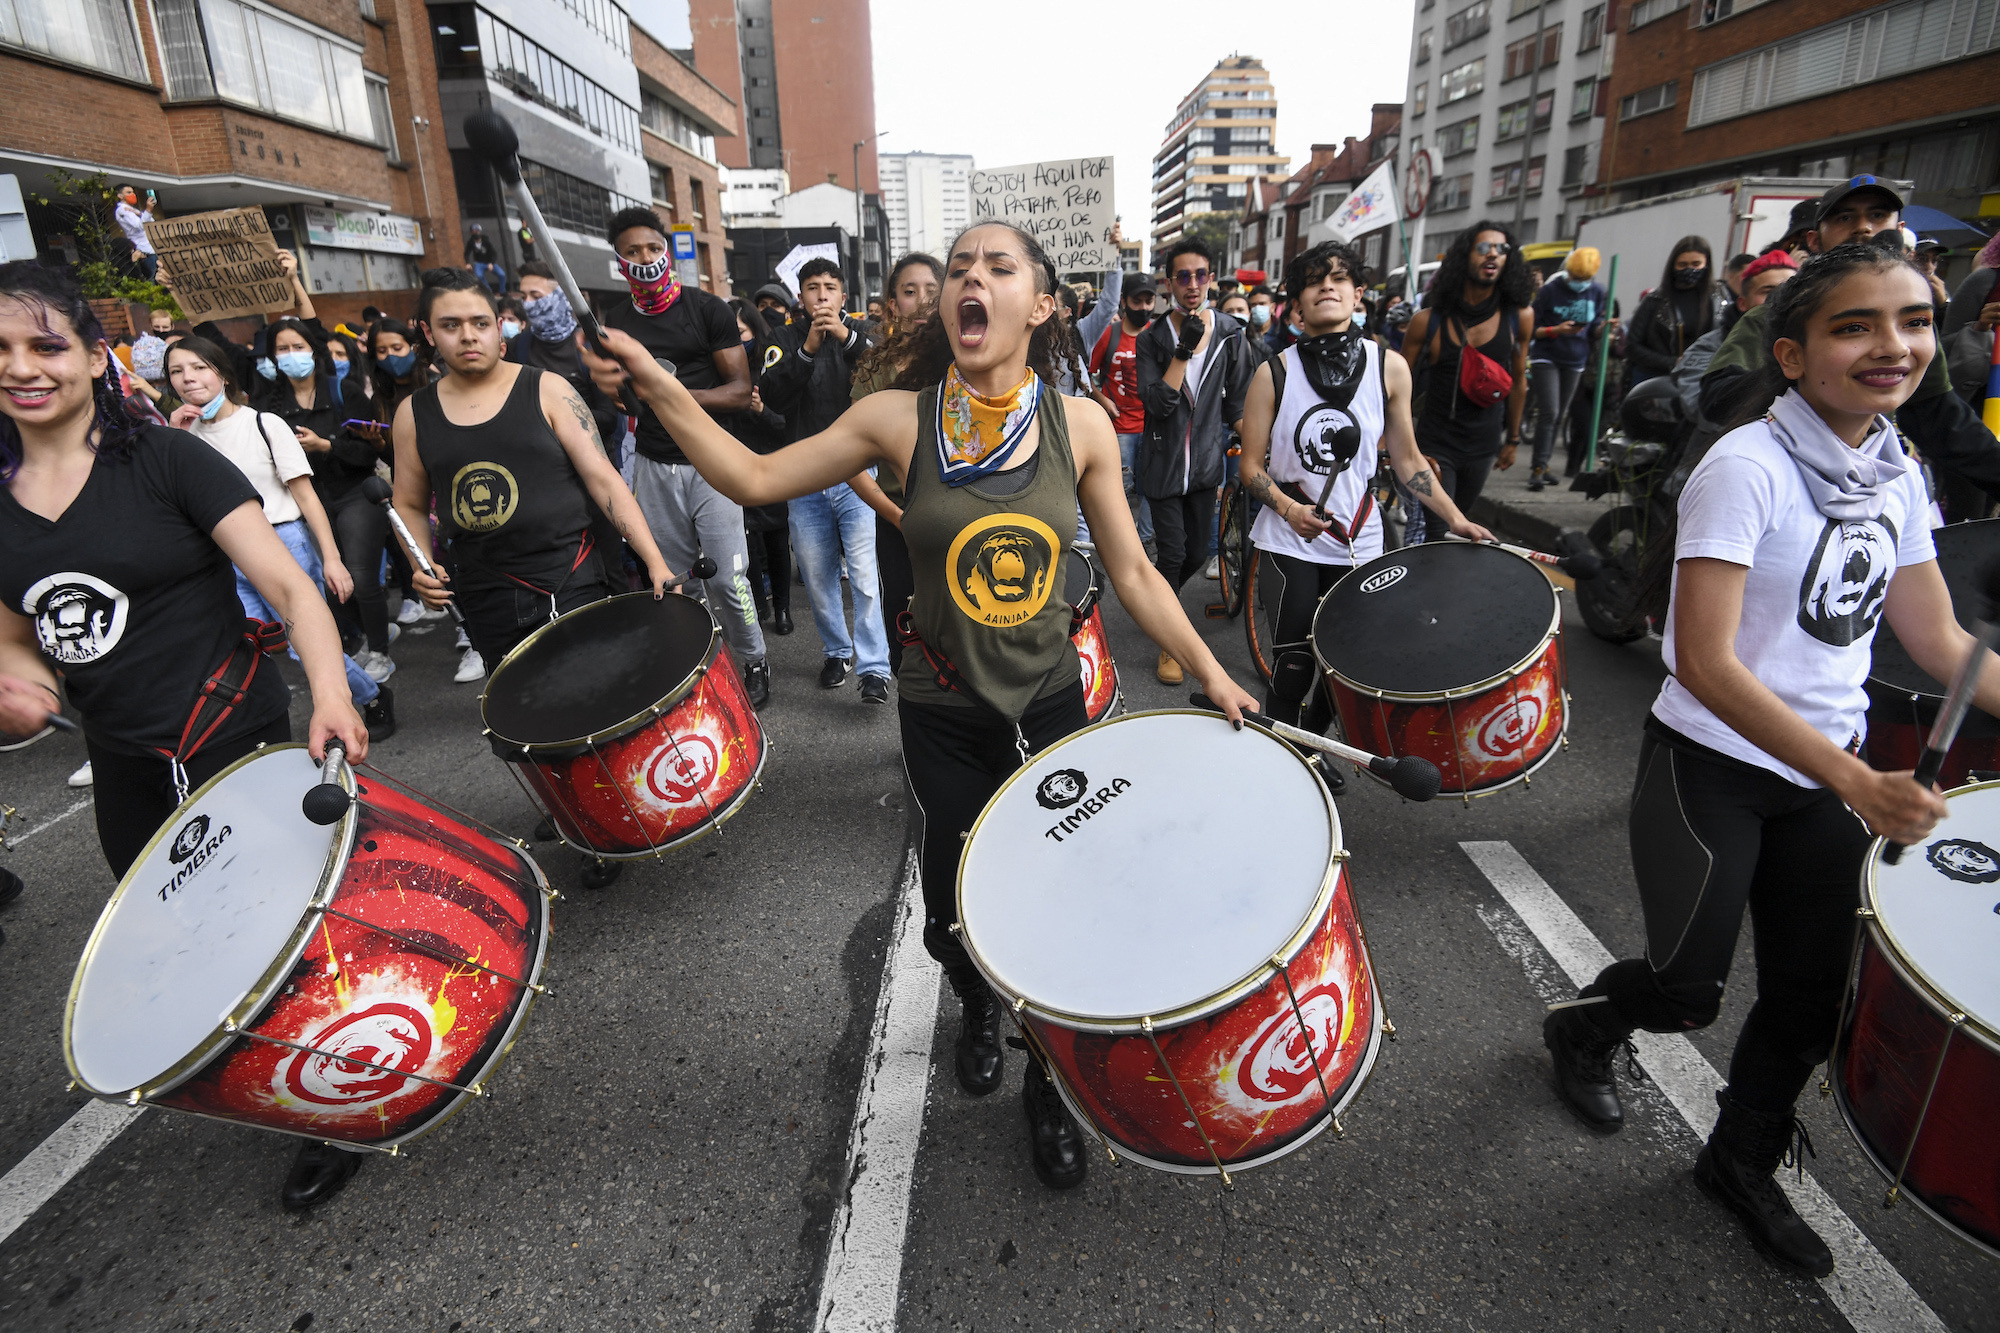 Protesters with drums